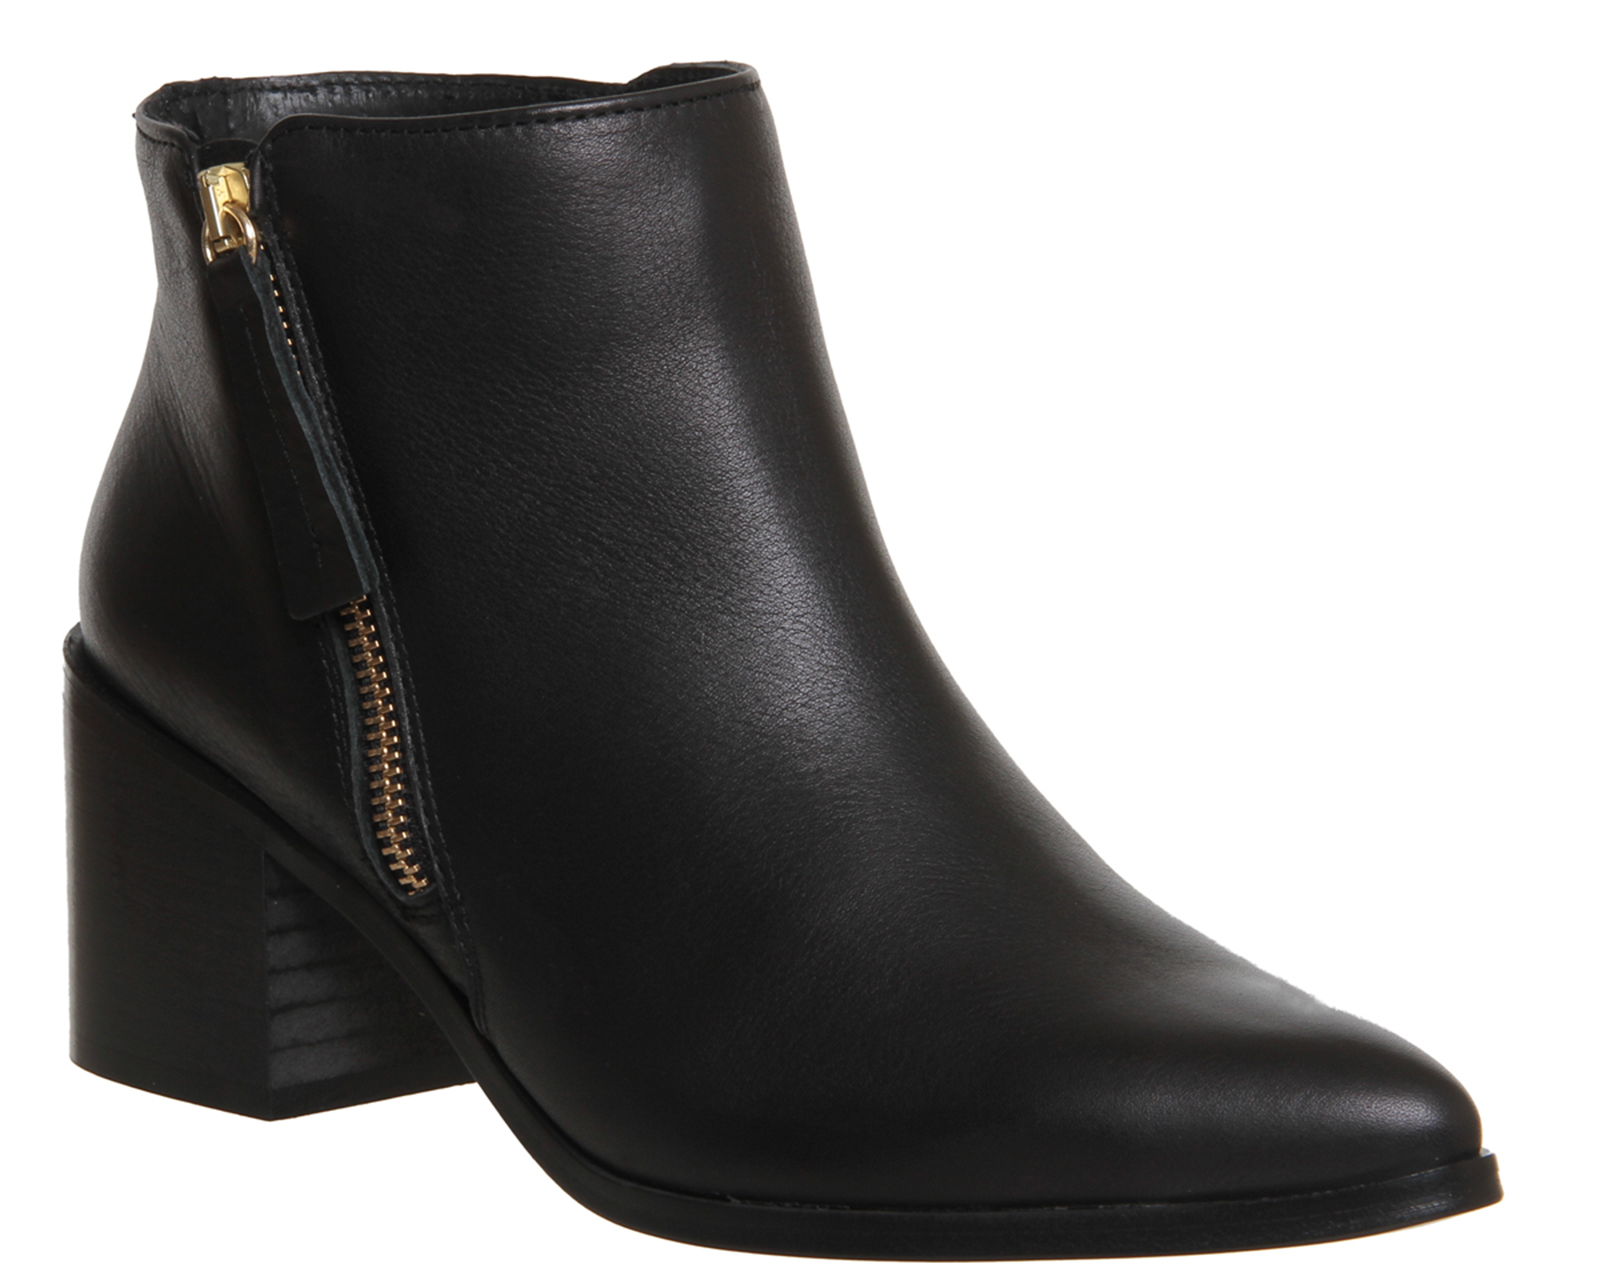 black leather zip ankle boots